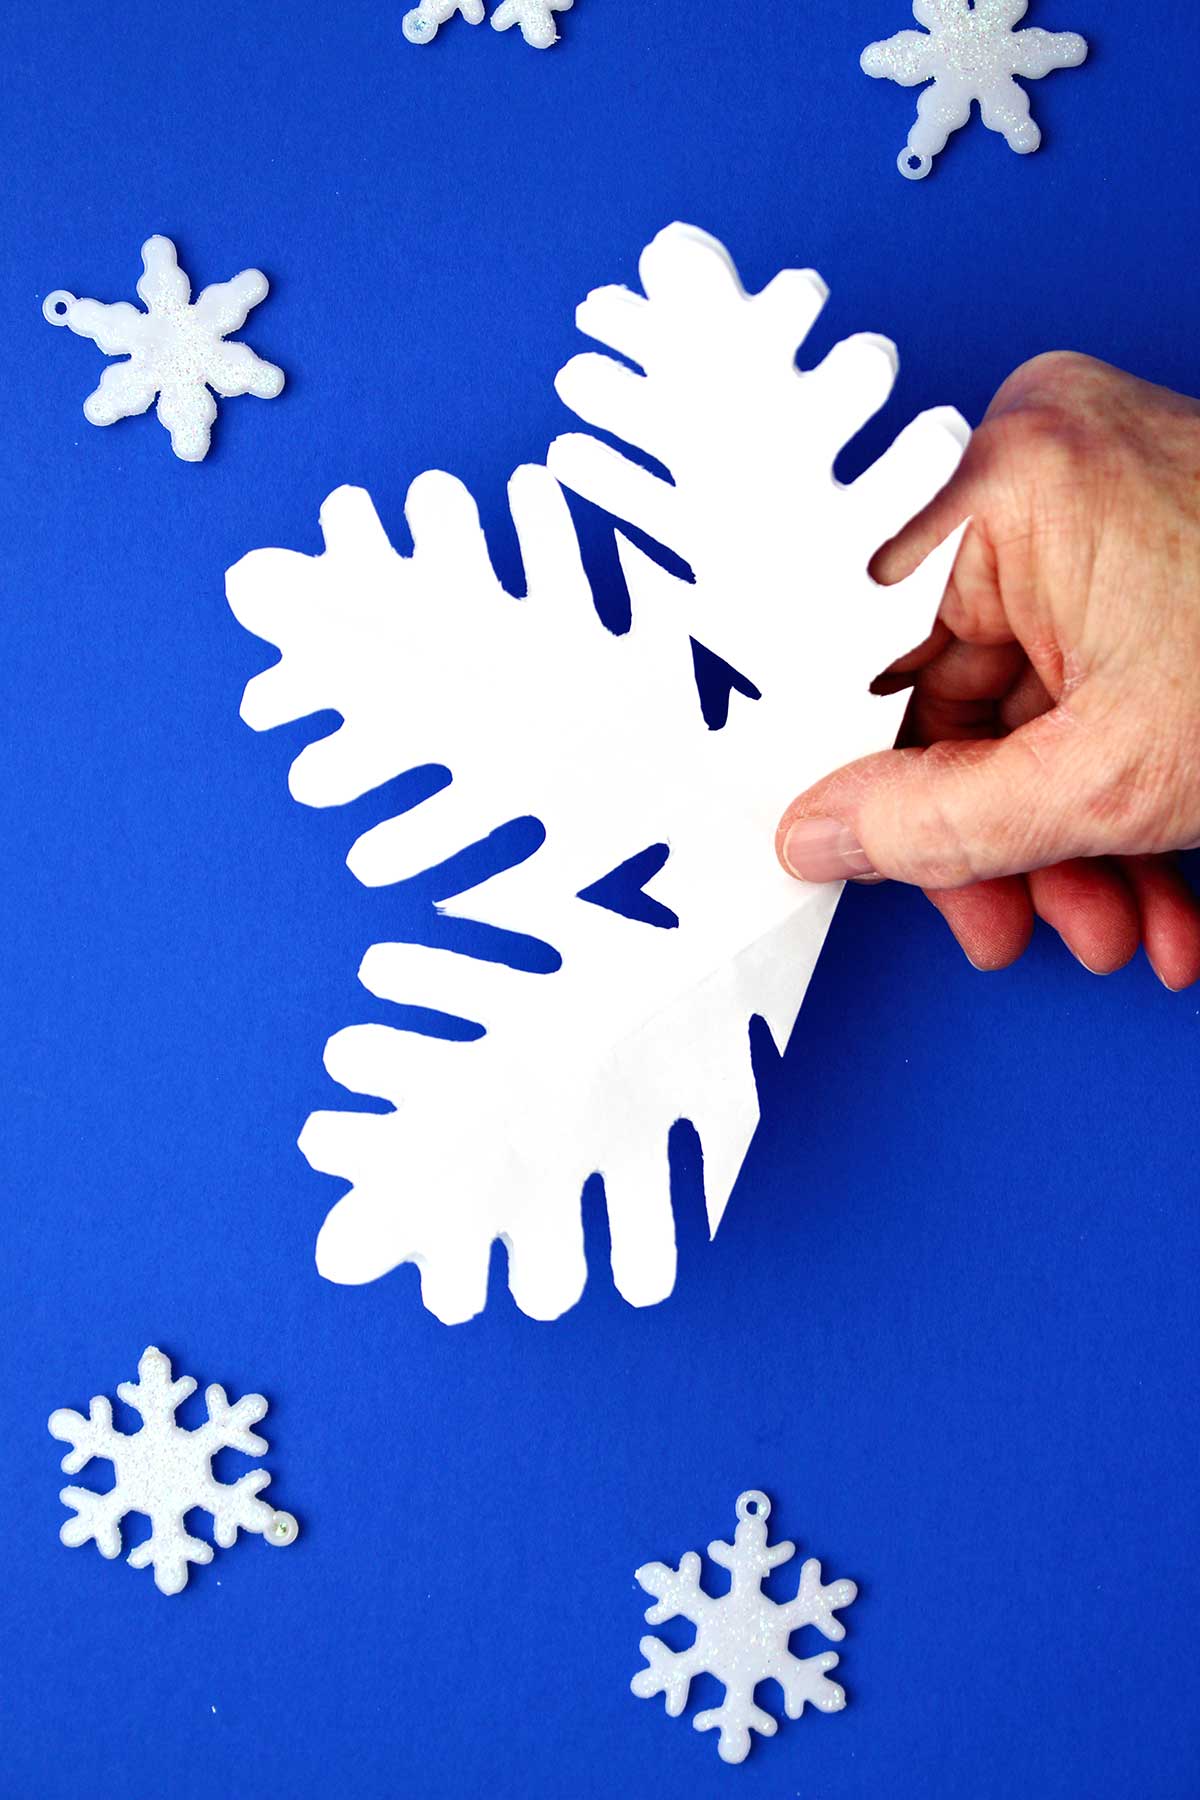 Hand holding half unfolded snowflake made from white paper.